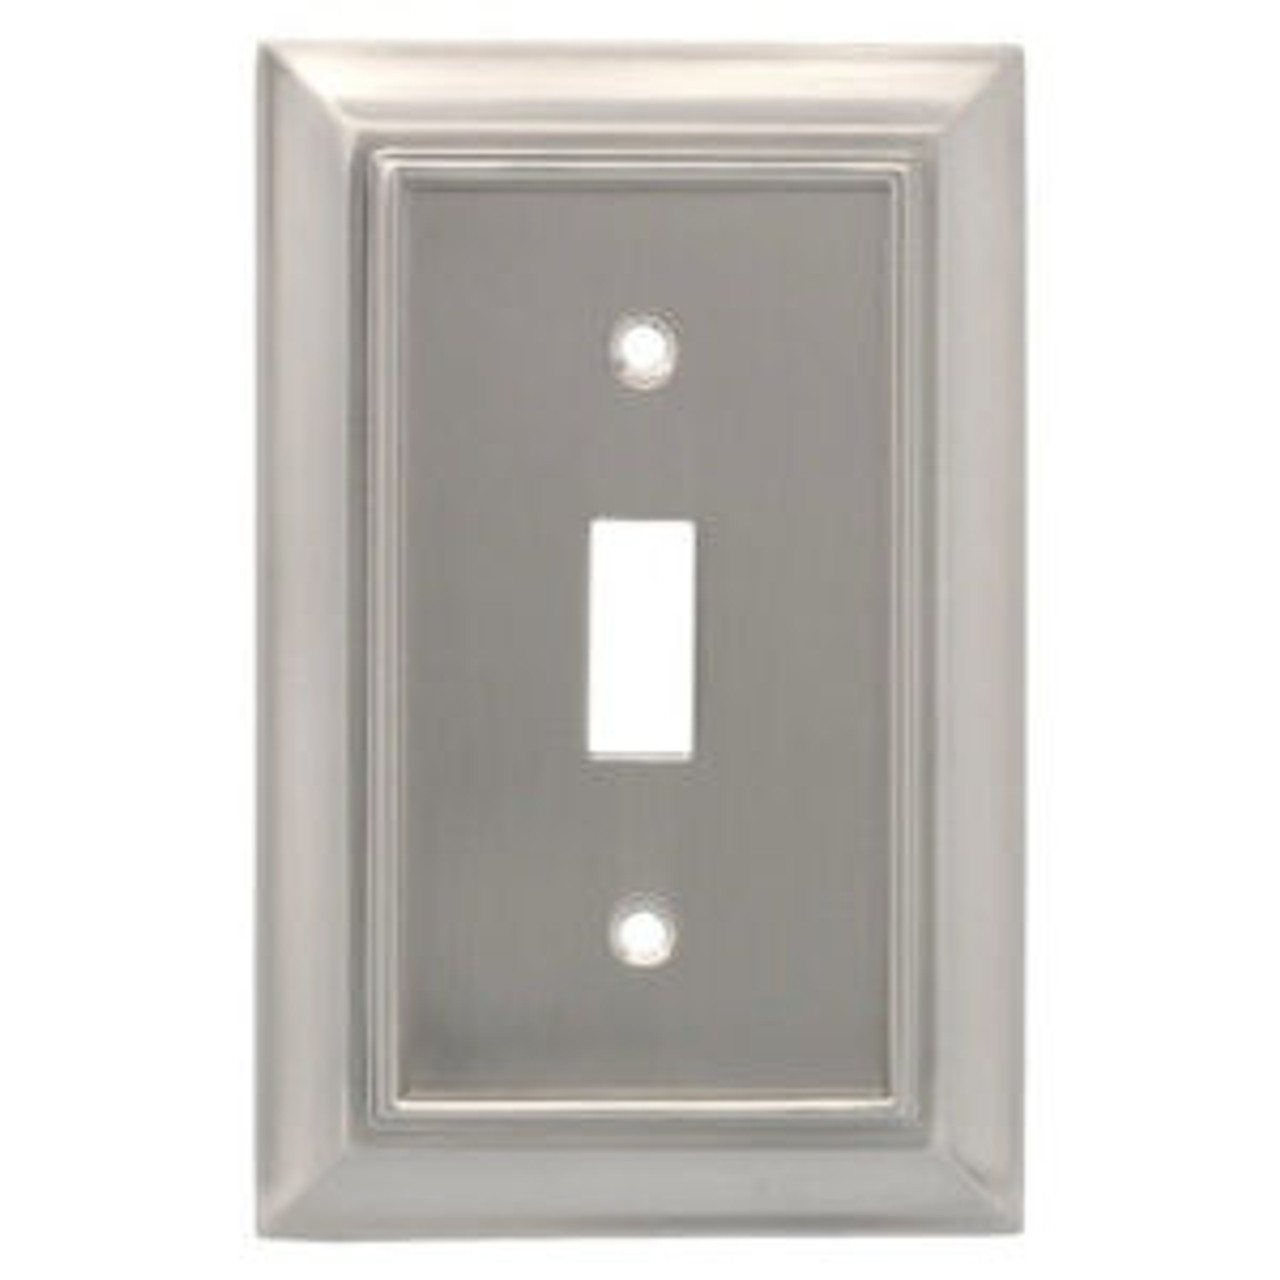 W10087-SN Satin Nickel Architect Single Switch Cover Plate